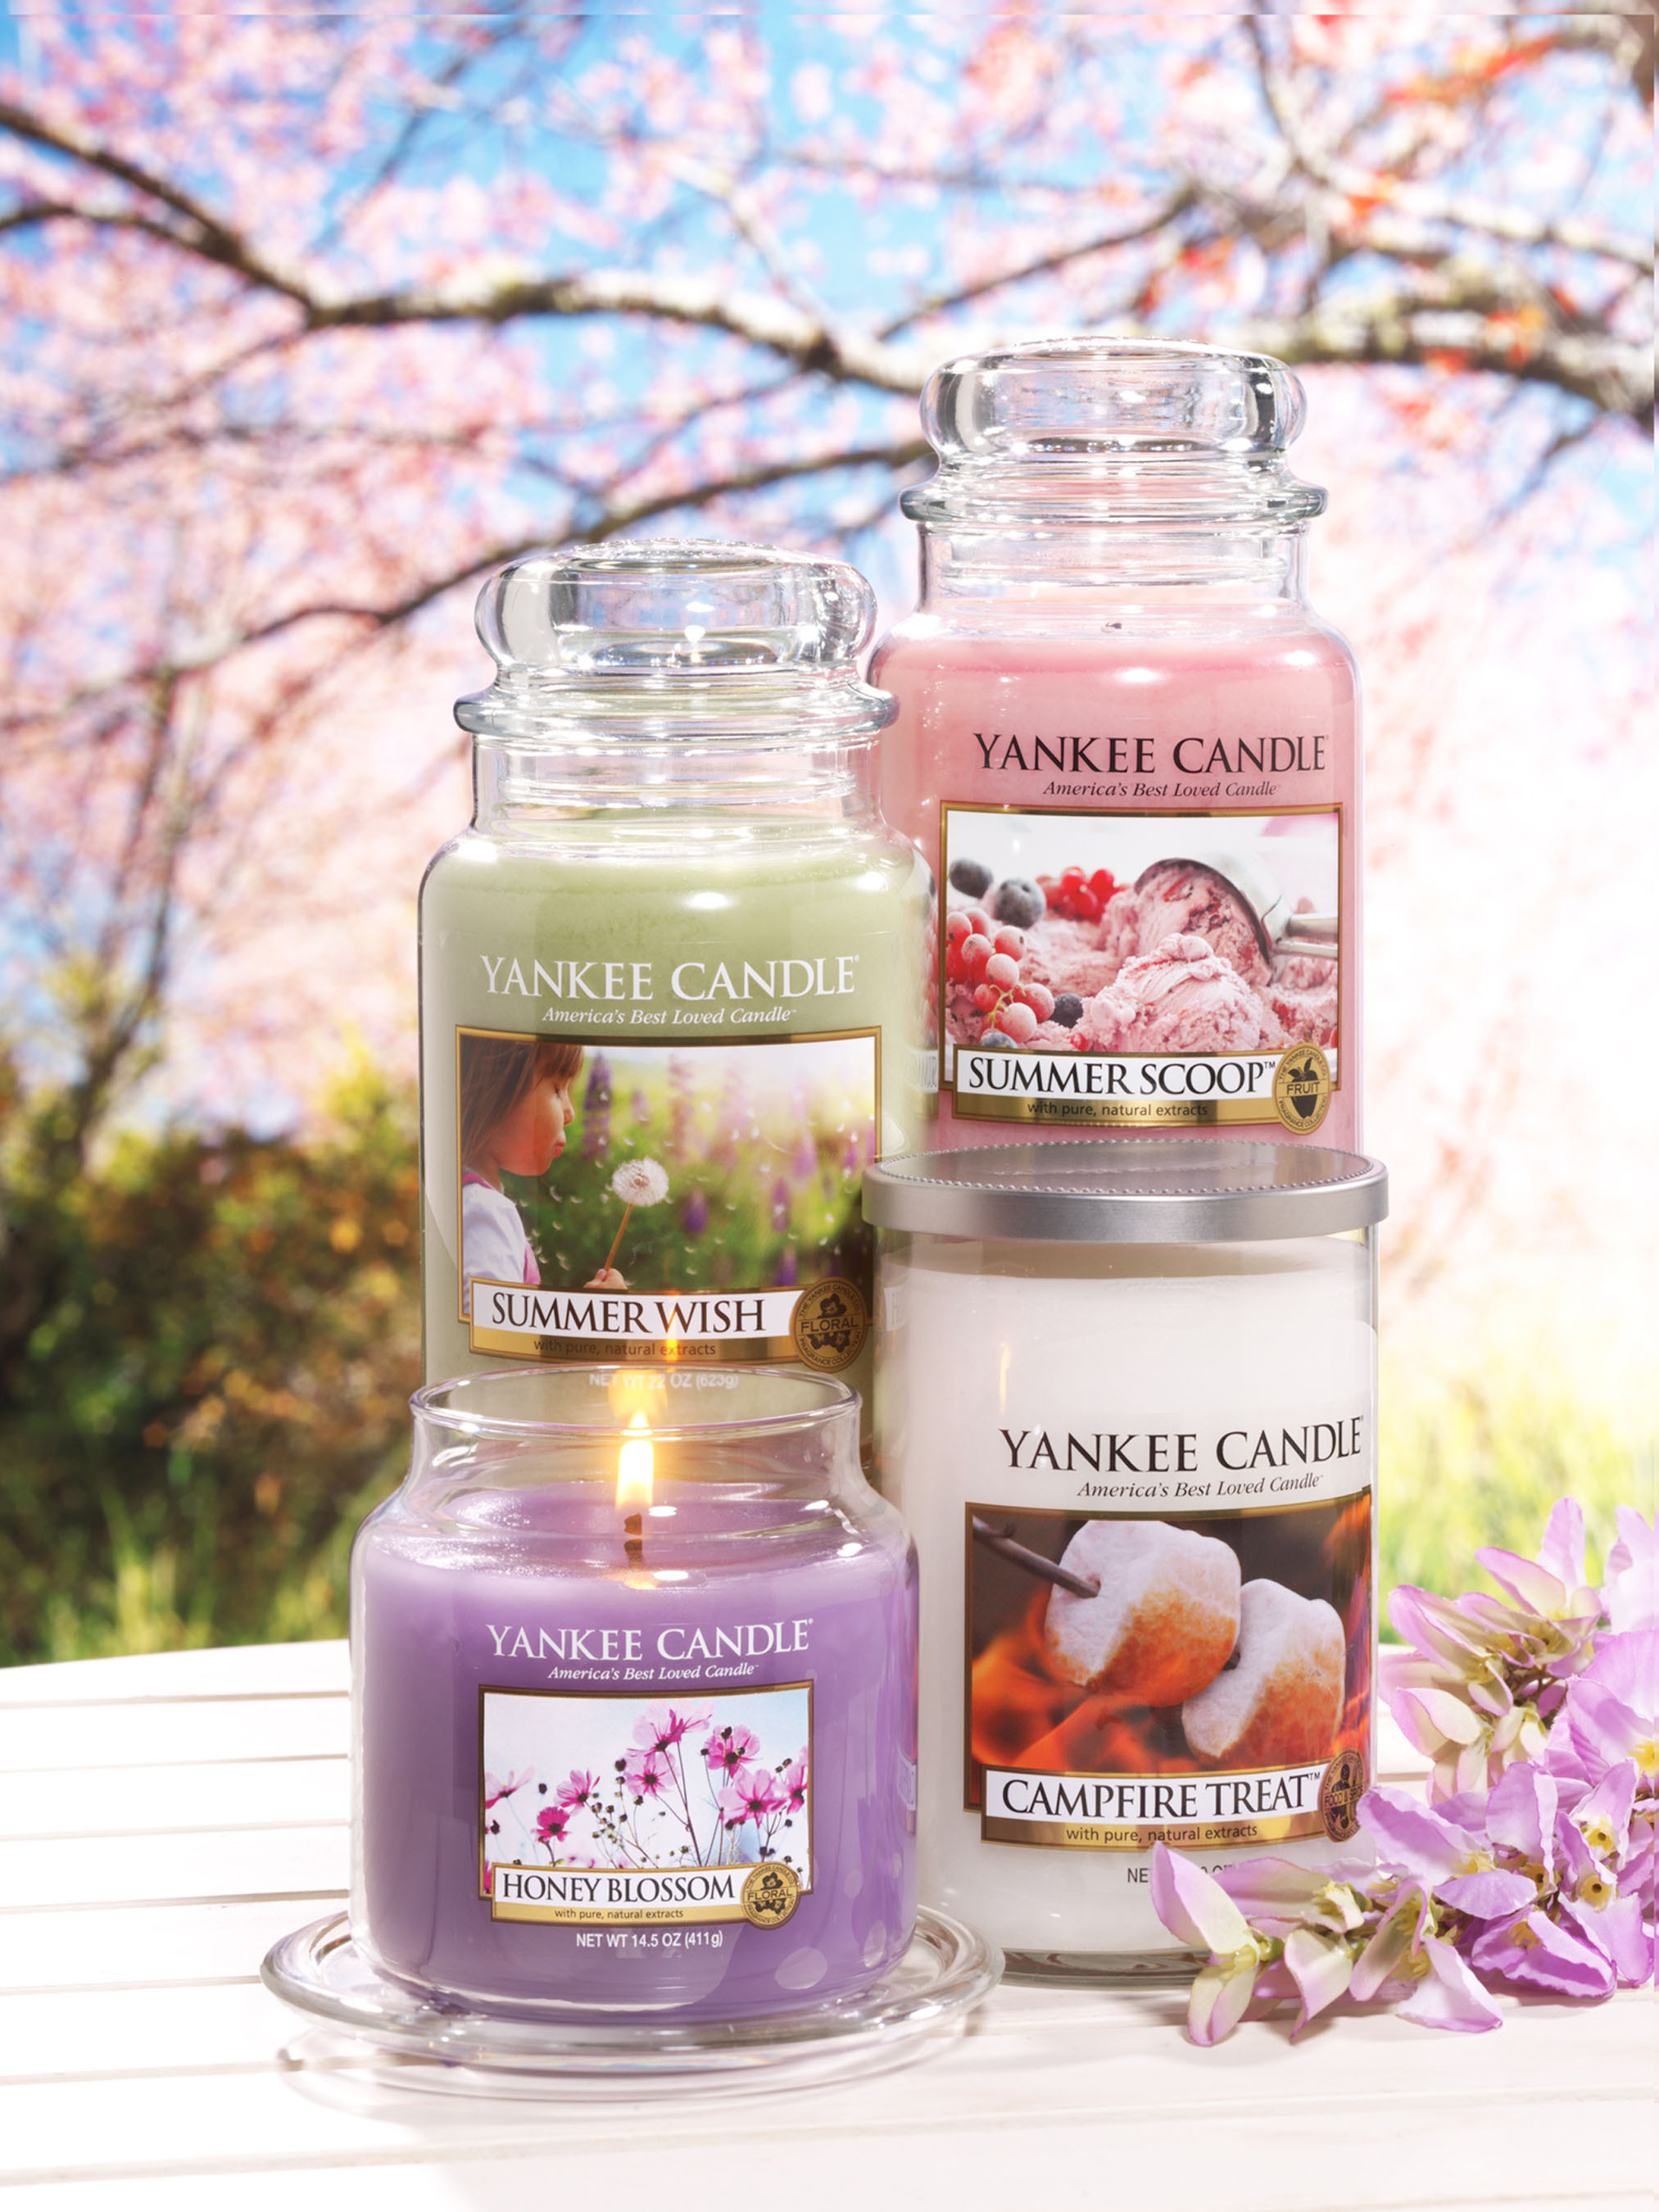 Yankee Candle Launches New Summer 2013 Fragrances